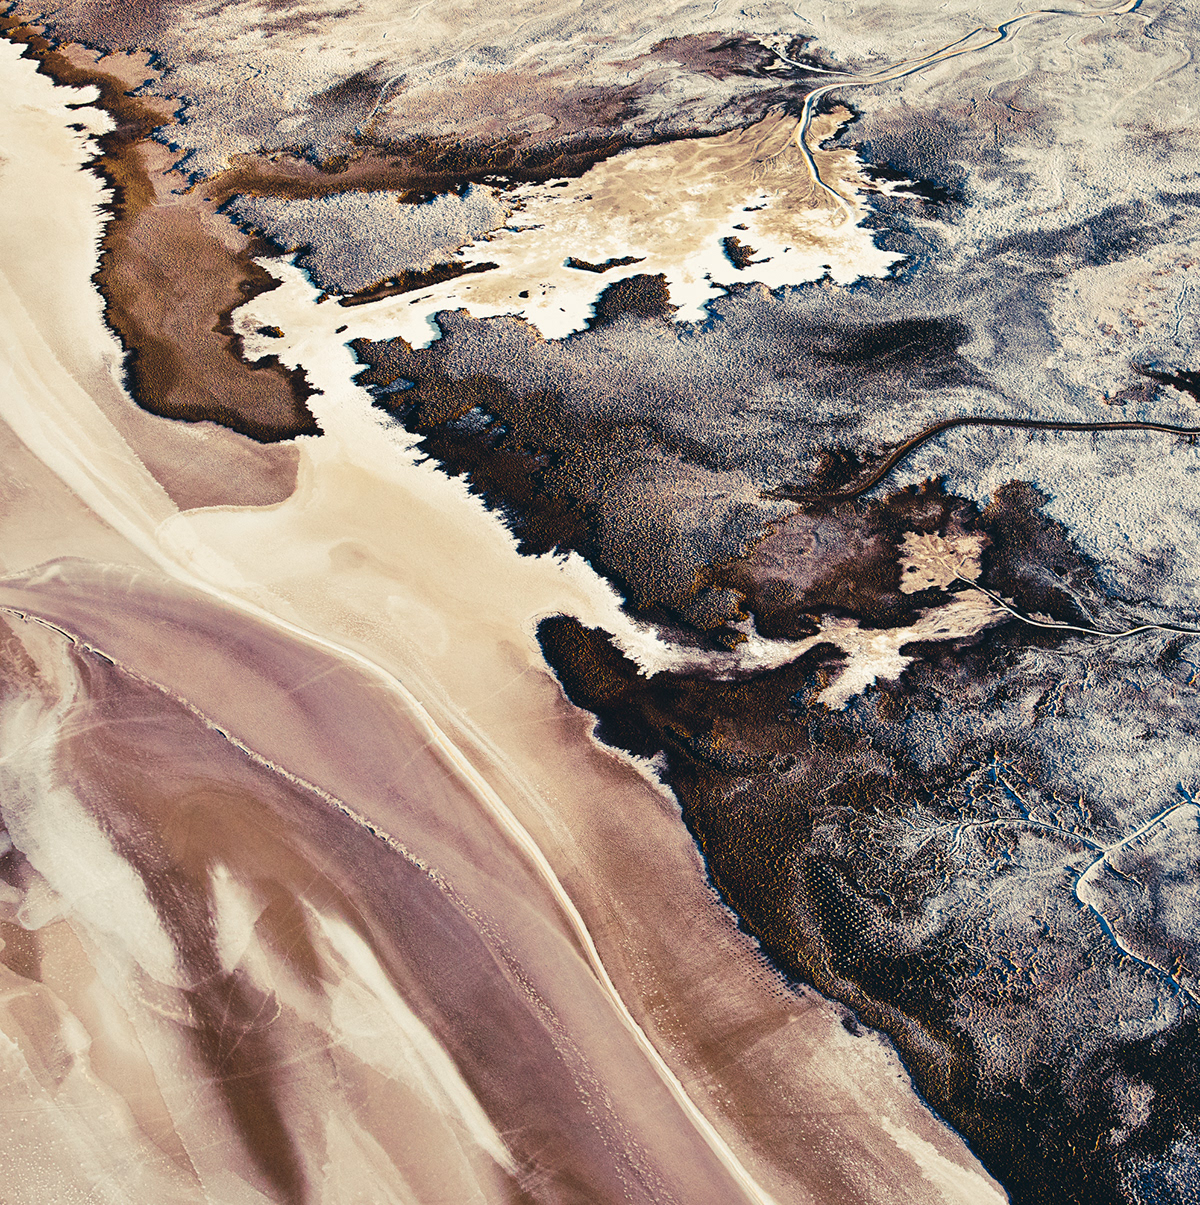 abstract aerials aerial desert images Aerial Fine Art california deserts sand corporate artwork Death Valley Mitch Rouse Aerials national park aerials phase one medium format sand dunes aerial